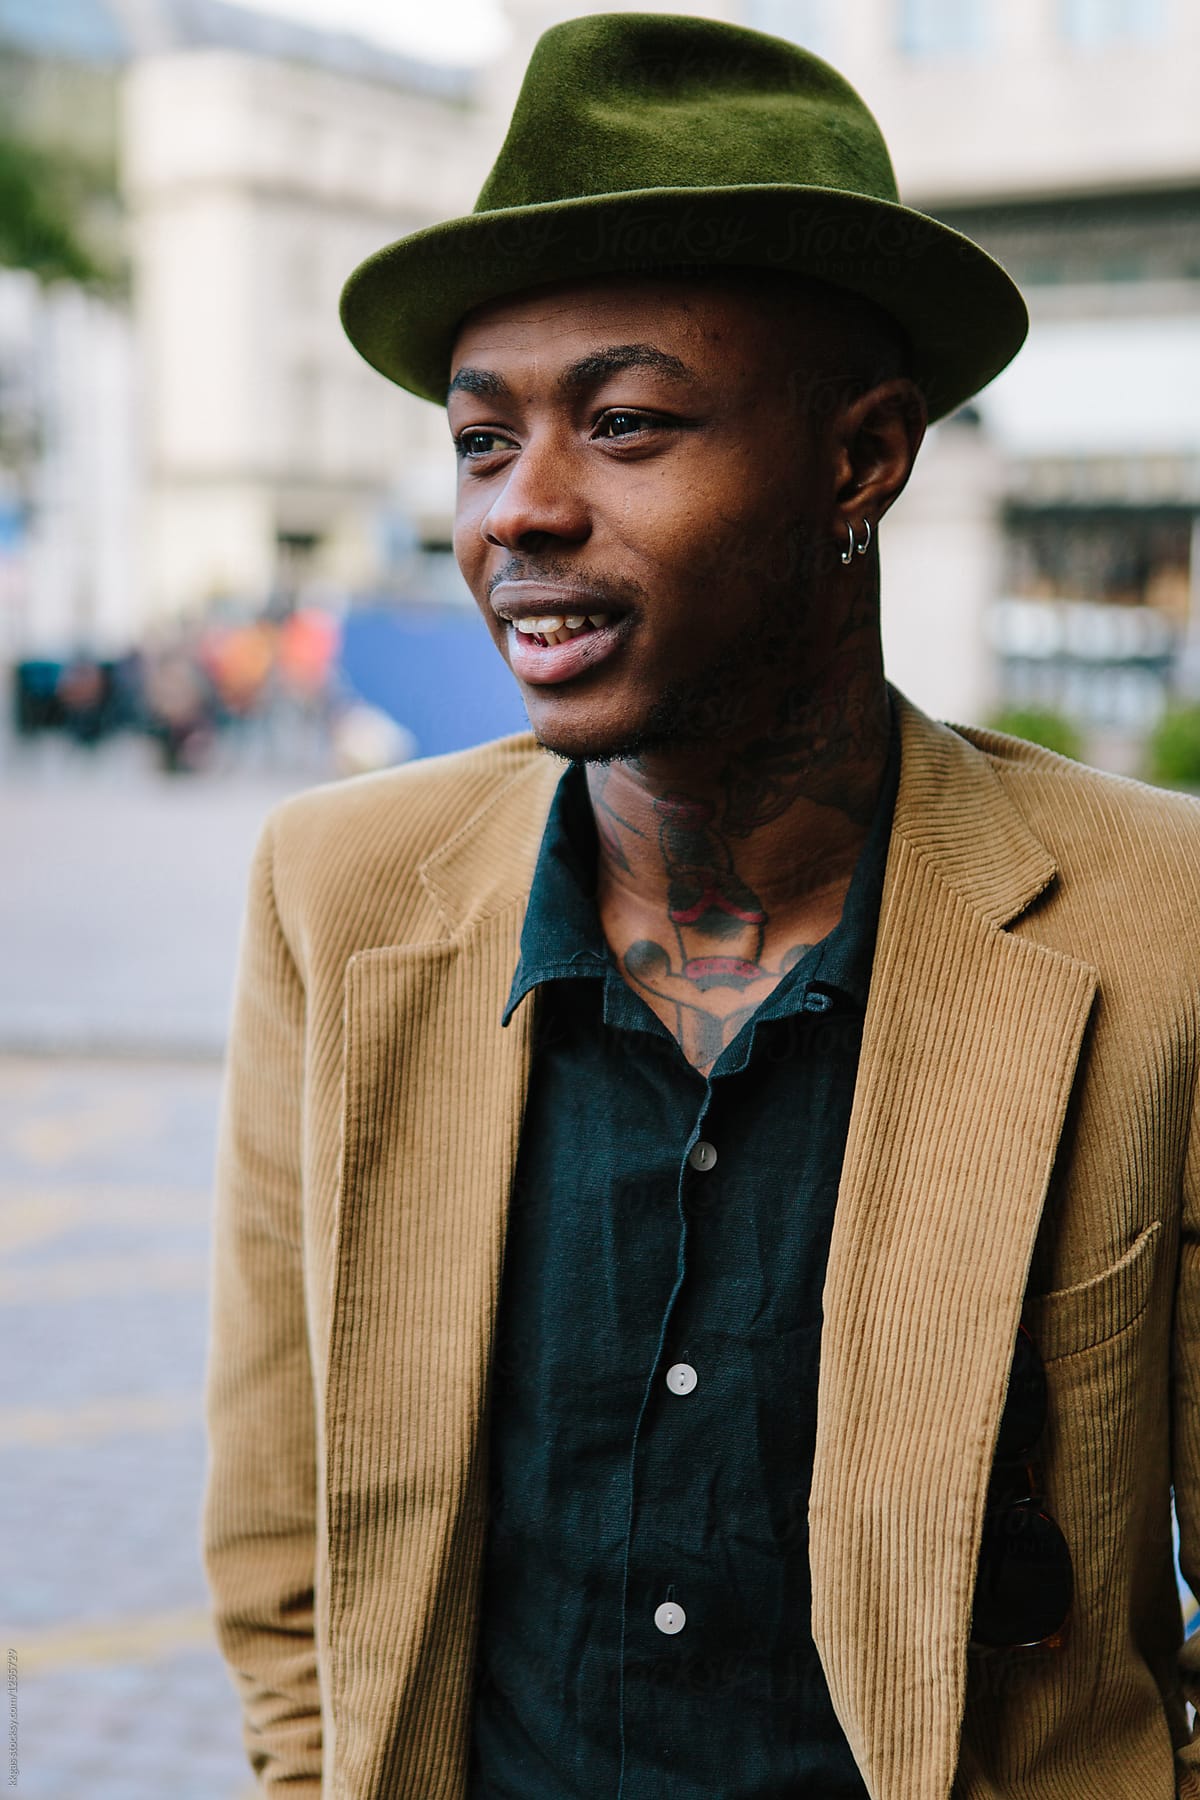 Stylish Young Black Man With Tattoos And Hat by Stocksy